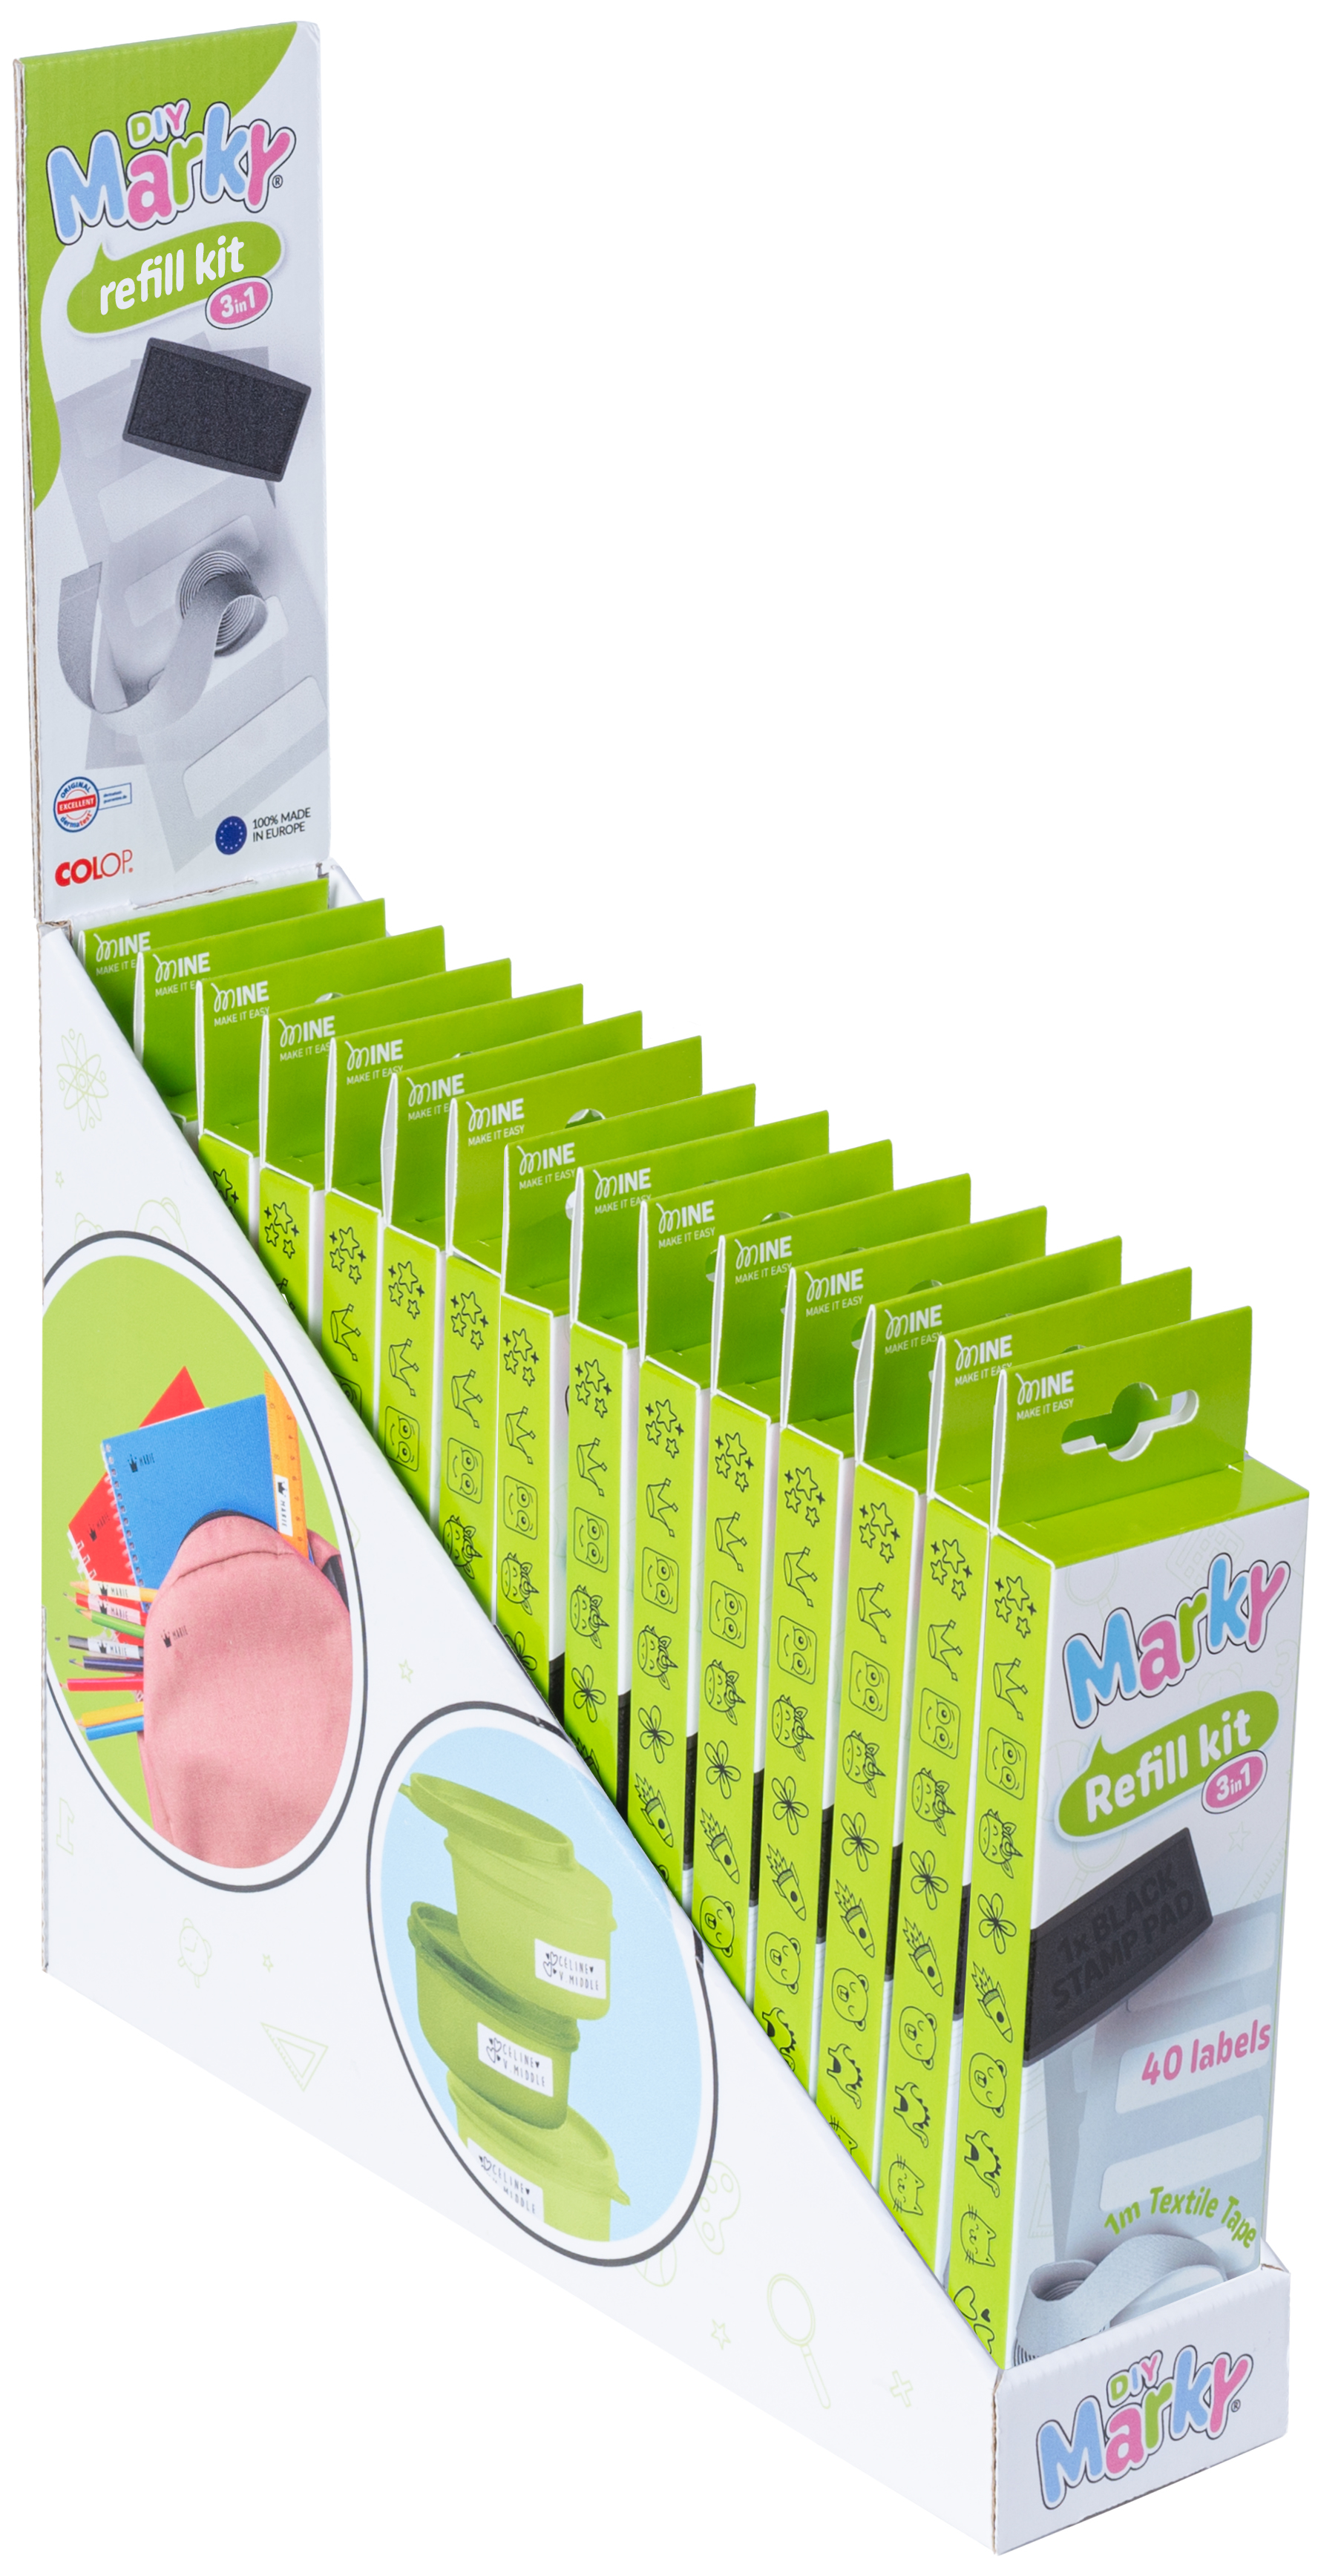 COLOP Tampon Marky 167197 Refillkit 16 piéces